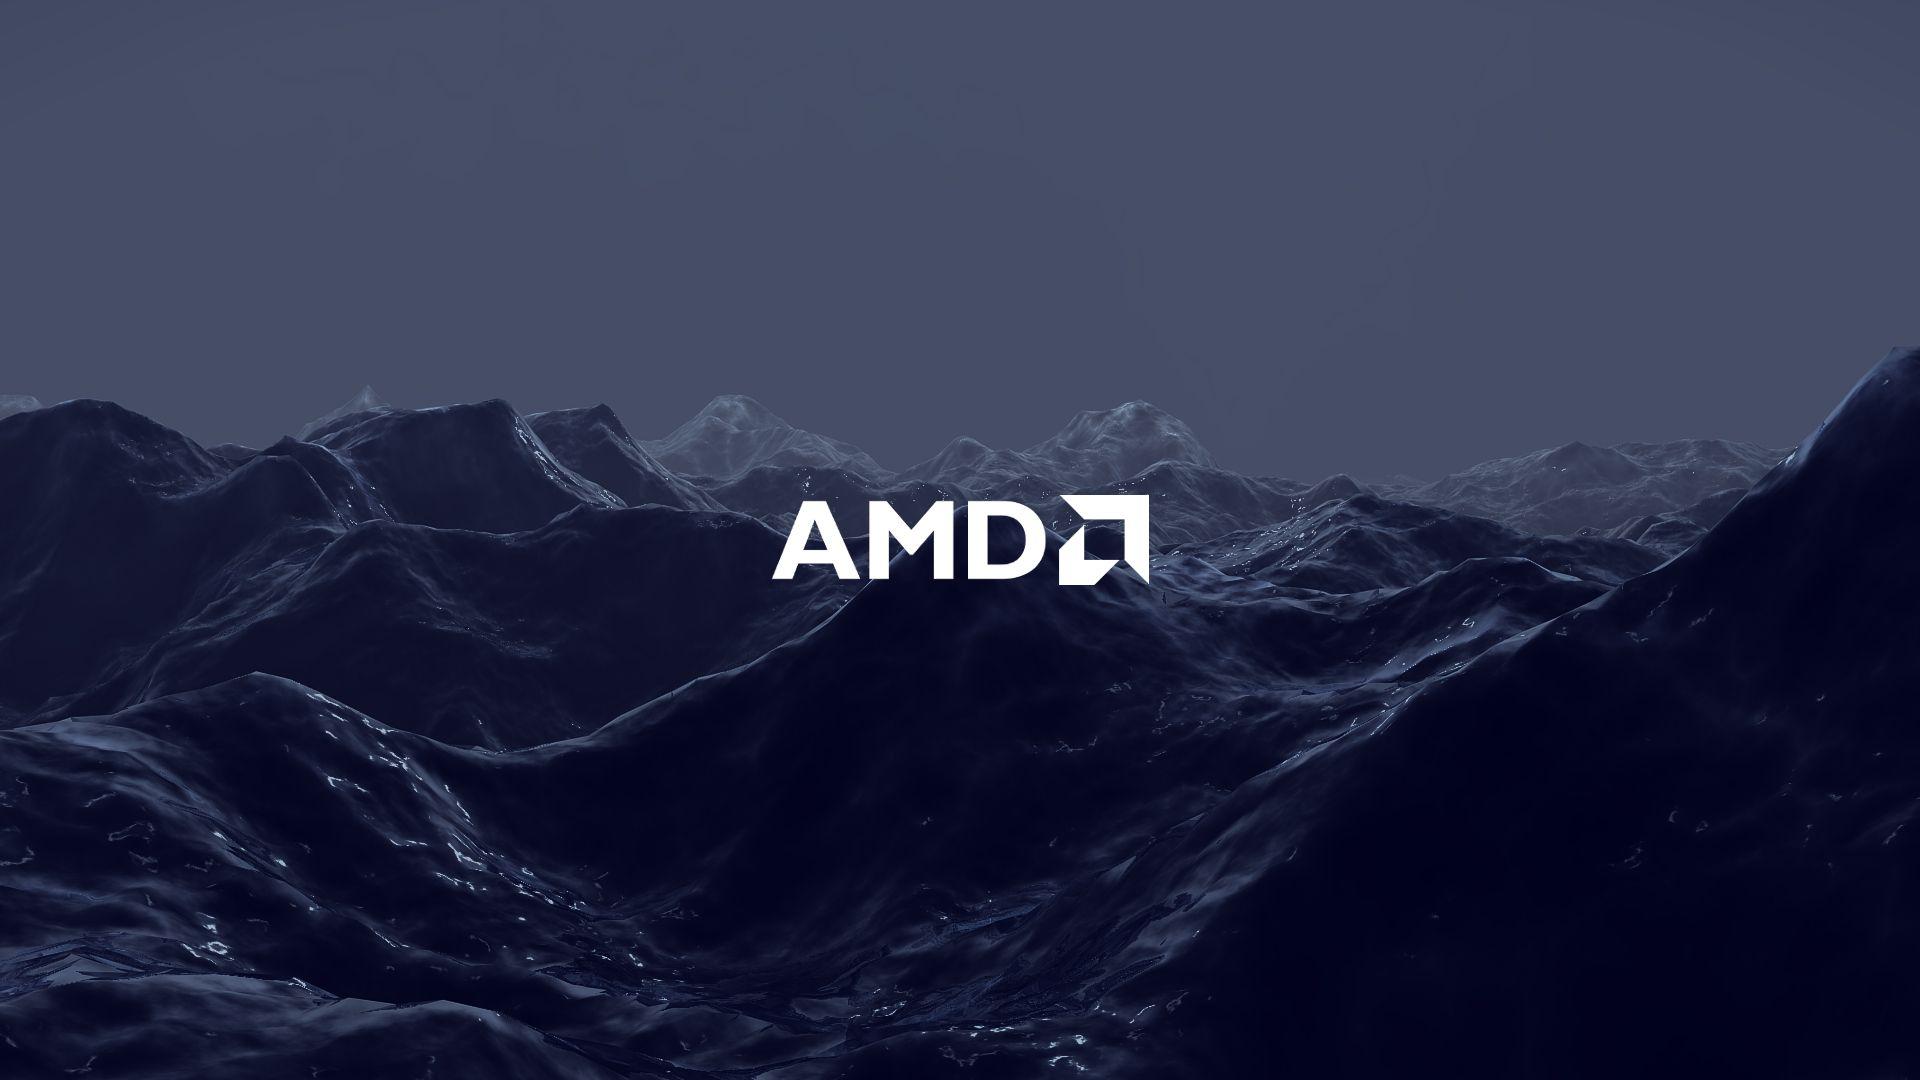 1920X1080 AMD Logo - Made wallpapers for NVIDIA and AMD users! : buildapc